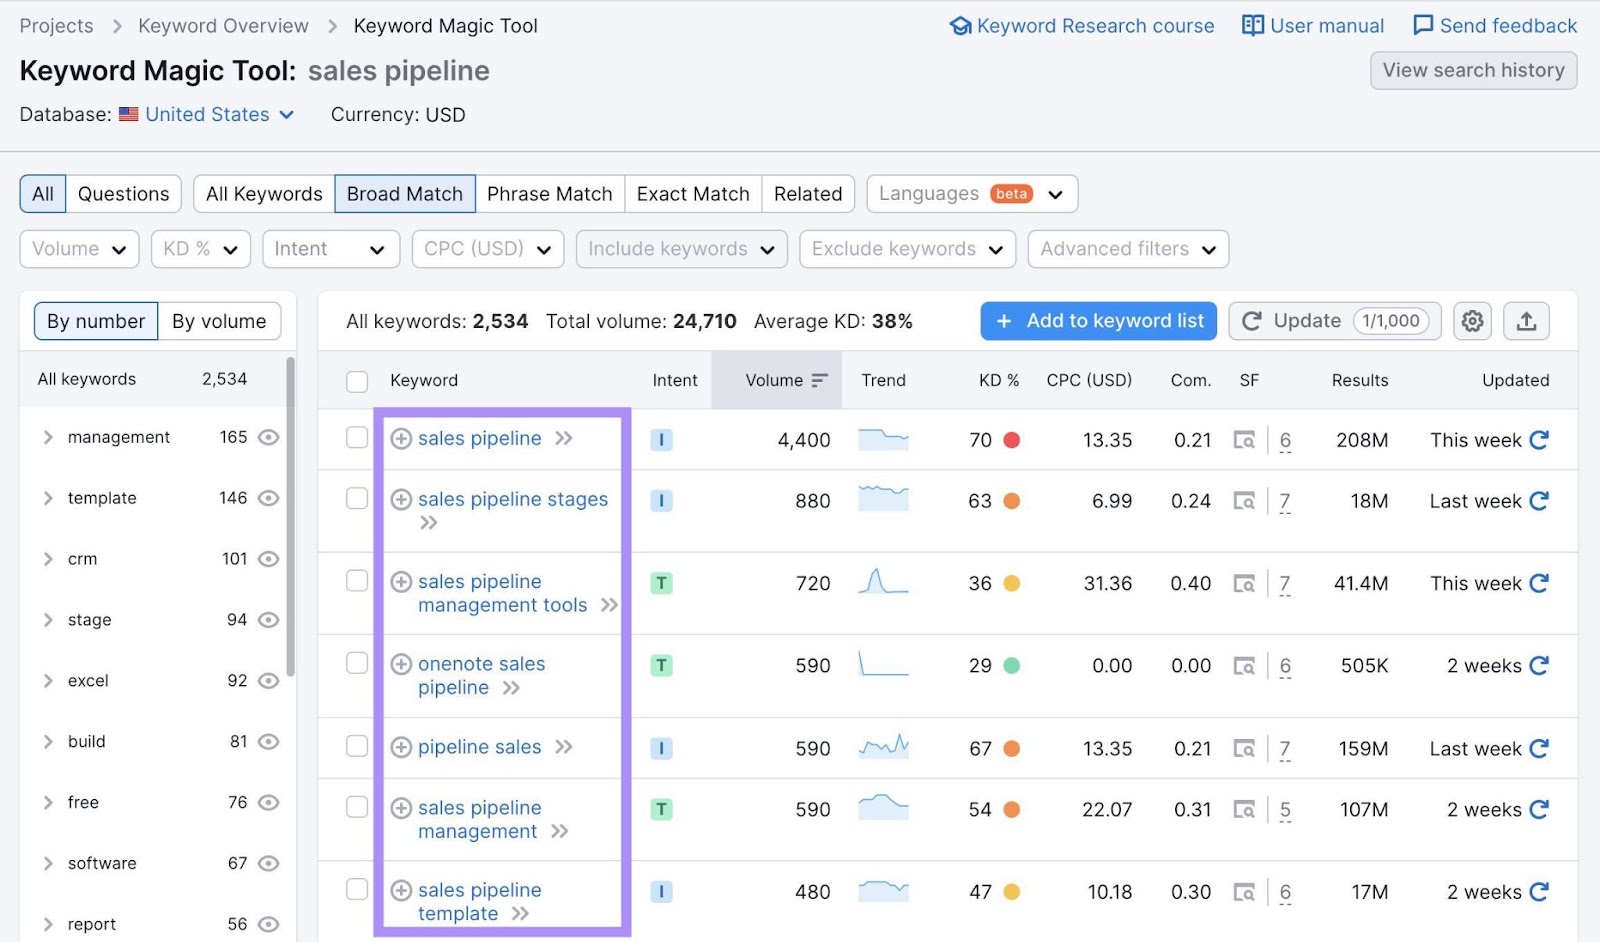 Keyword Magic Tool results for "sales pipeline"